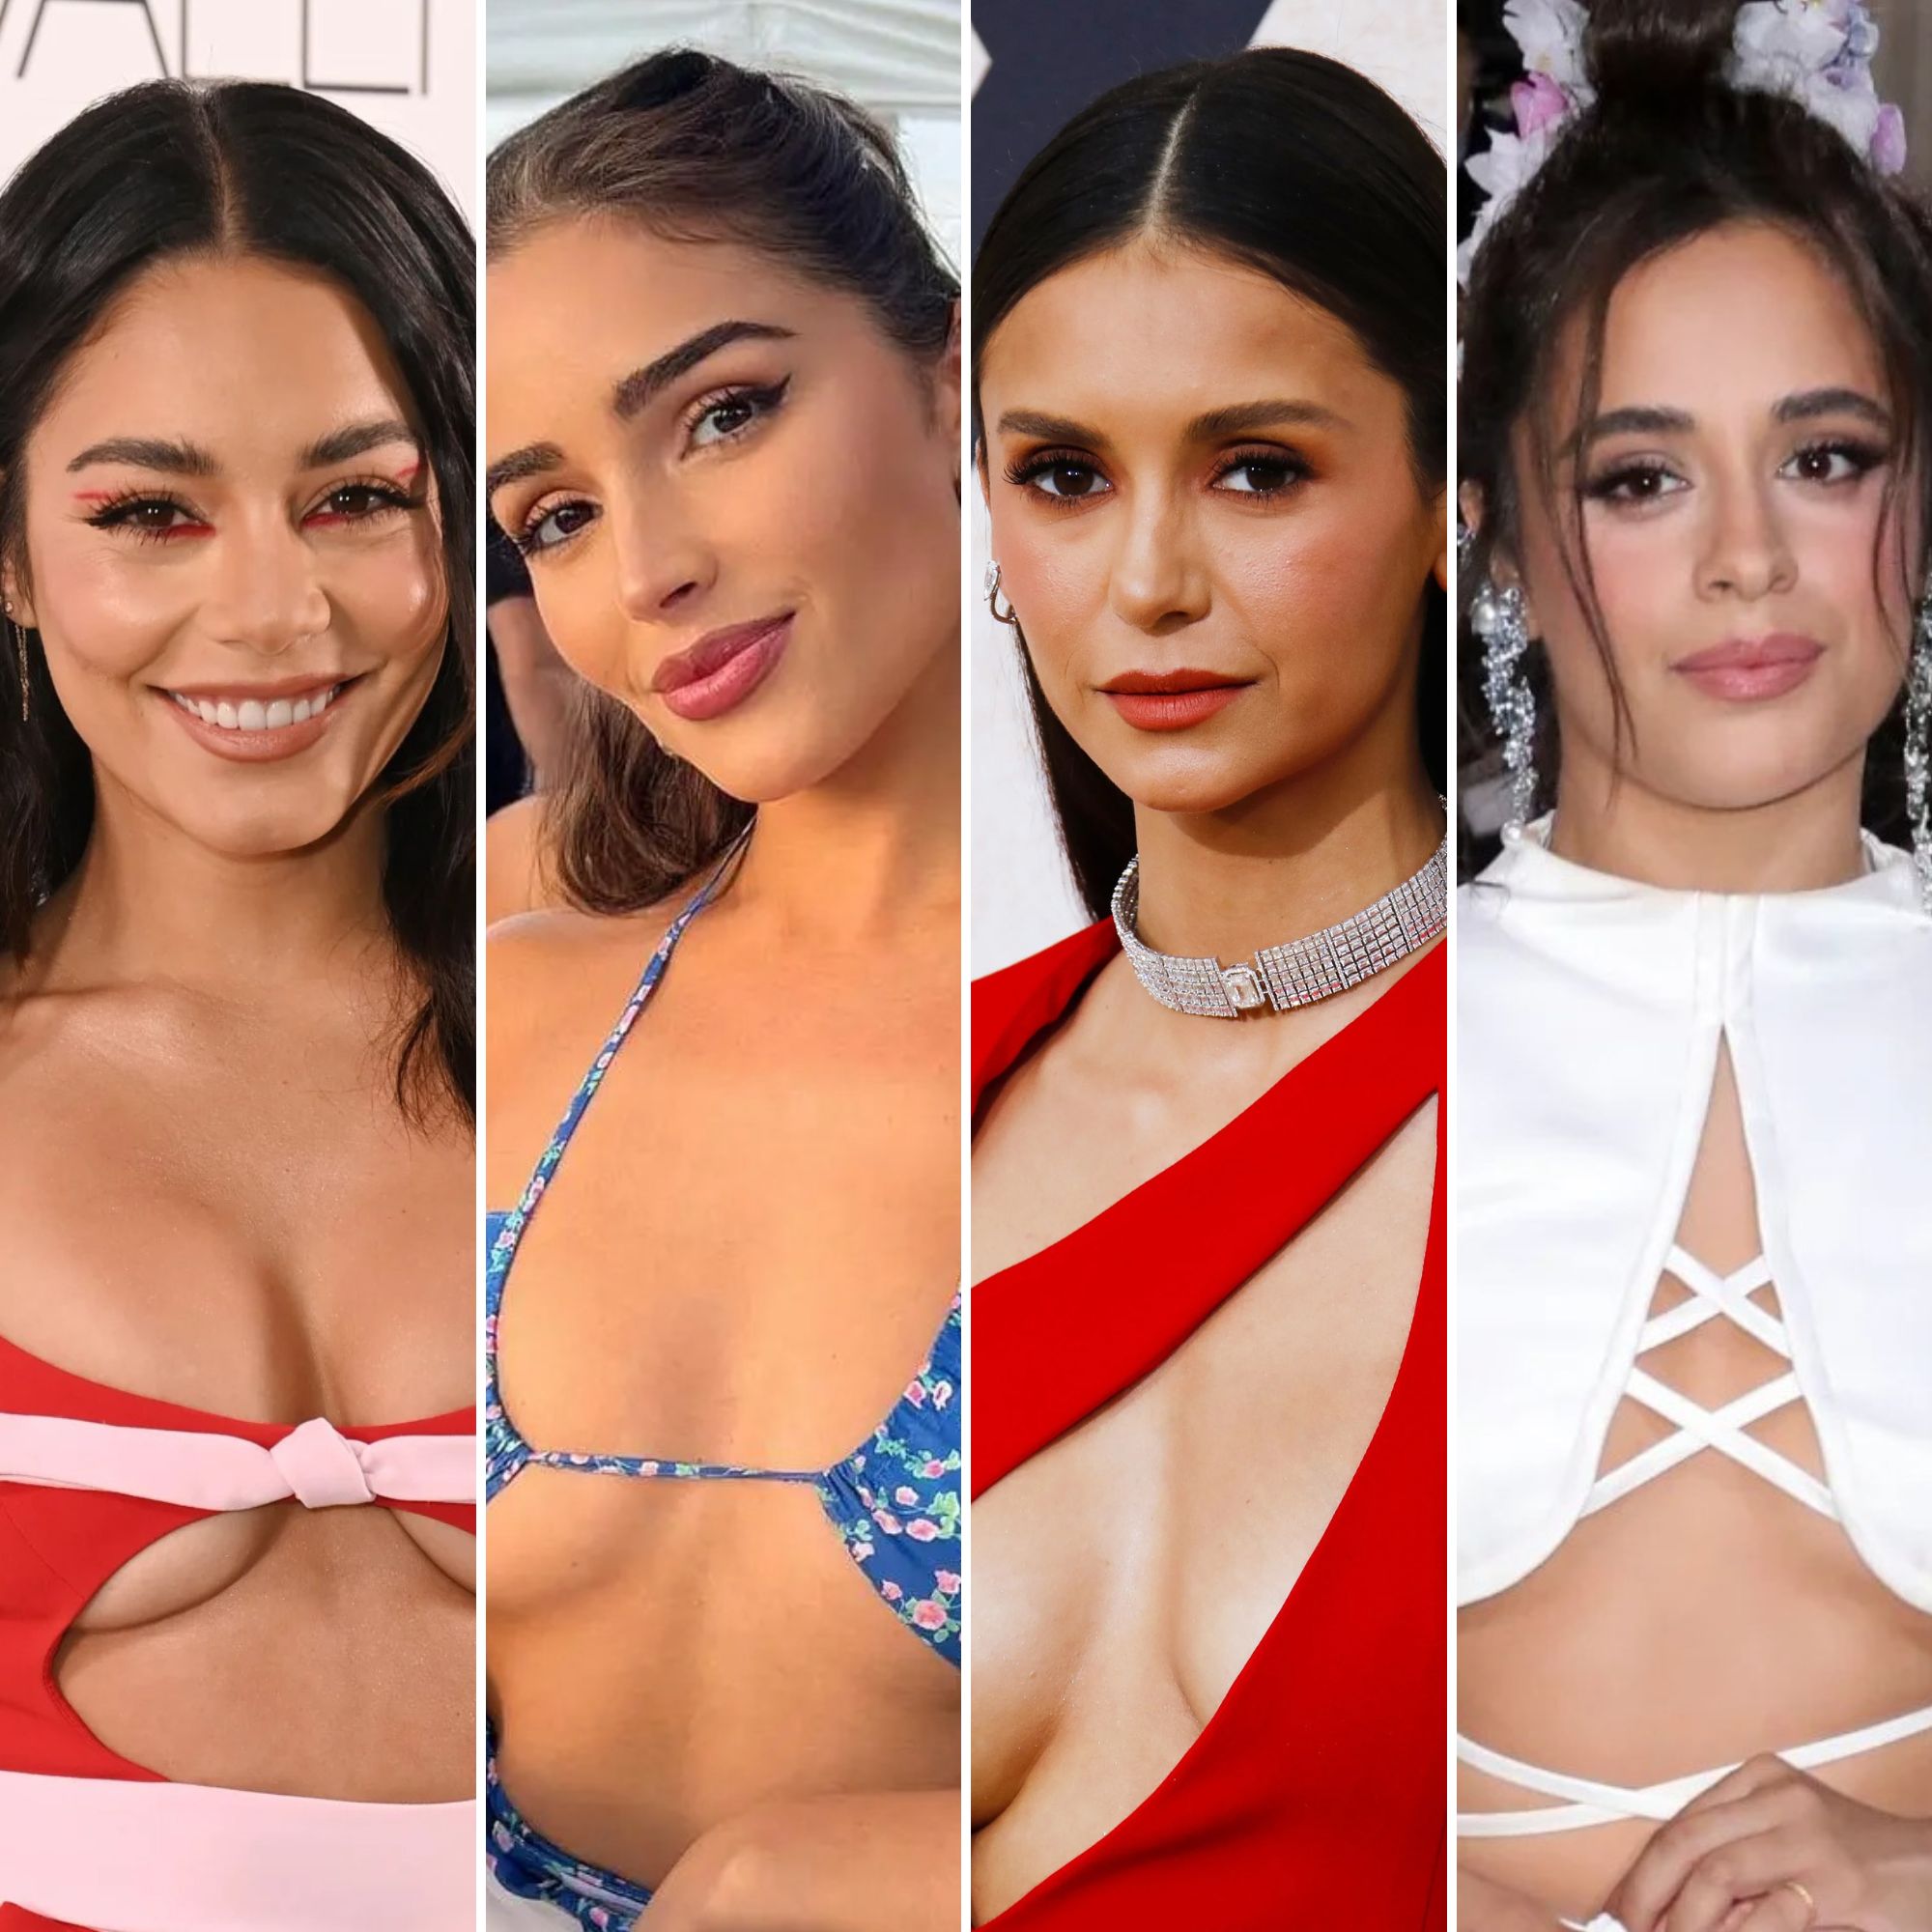 https://www.lifeandstylemag.com/wp-content/uploads/2022/11/Celebrities-Showing-Off-Underboob-Stars-Rocking-2022s-Hottest-and-Sexiest-New-Trend-.jpg?fit=2000%2C2000&quality=86&strip=all